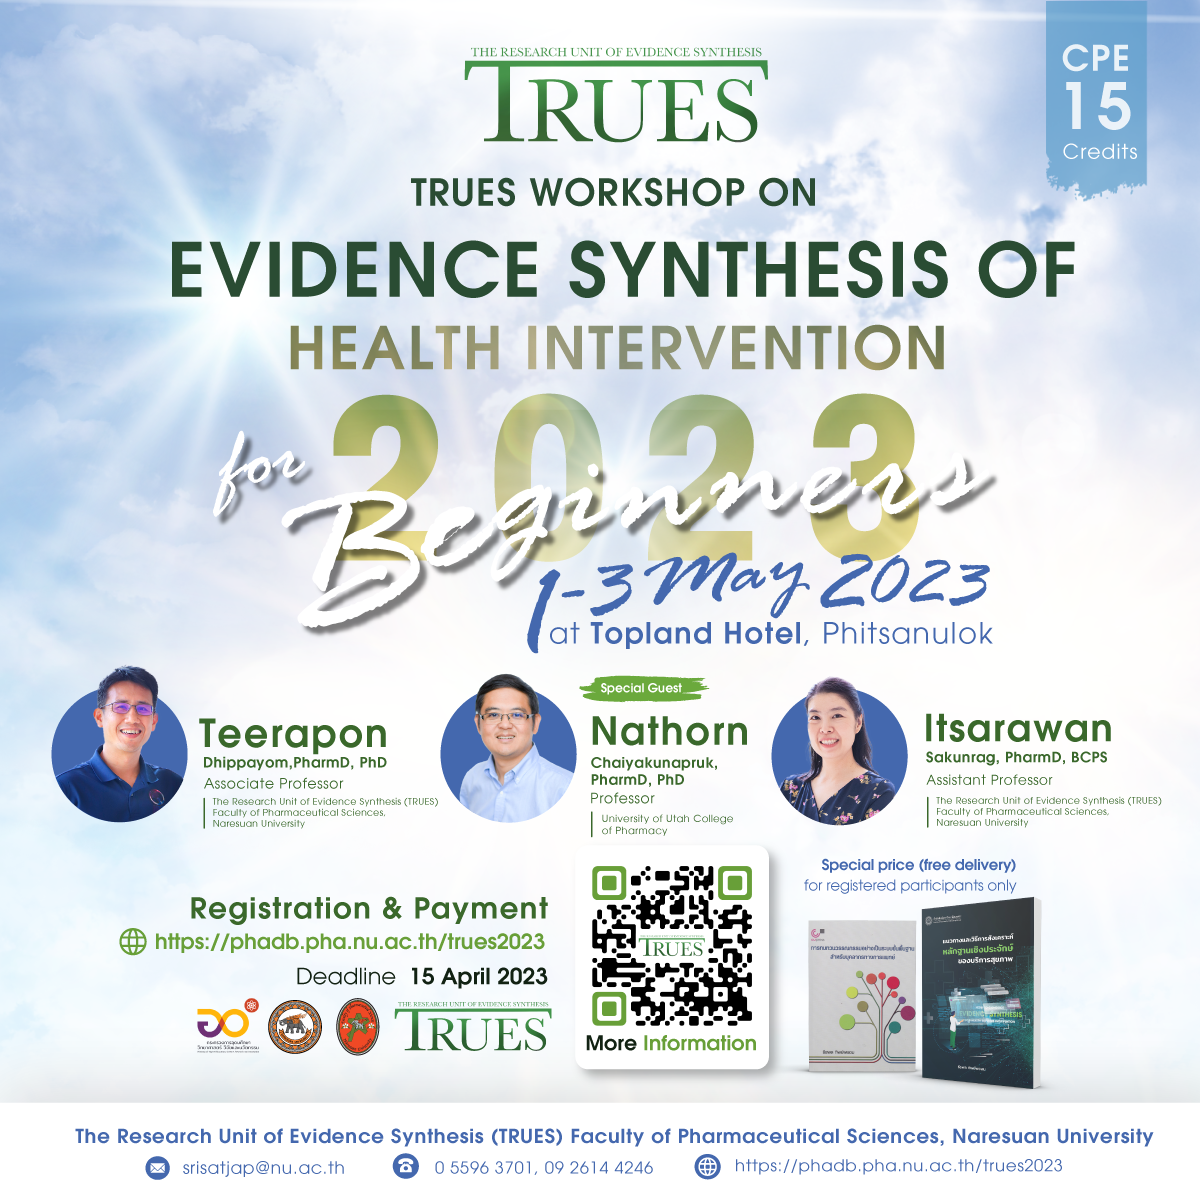 TRUES Workshop on Evidence Synthesis of Health Intervention 2023 for Beginners